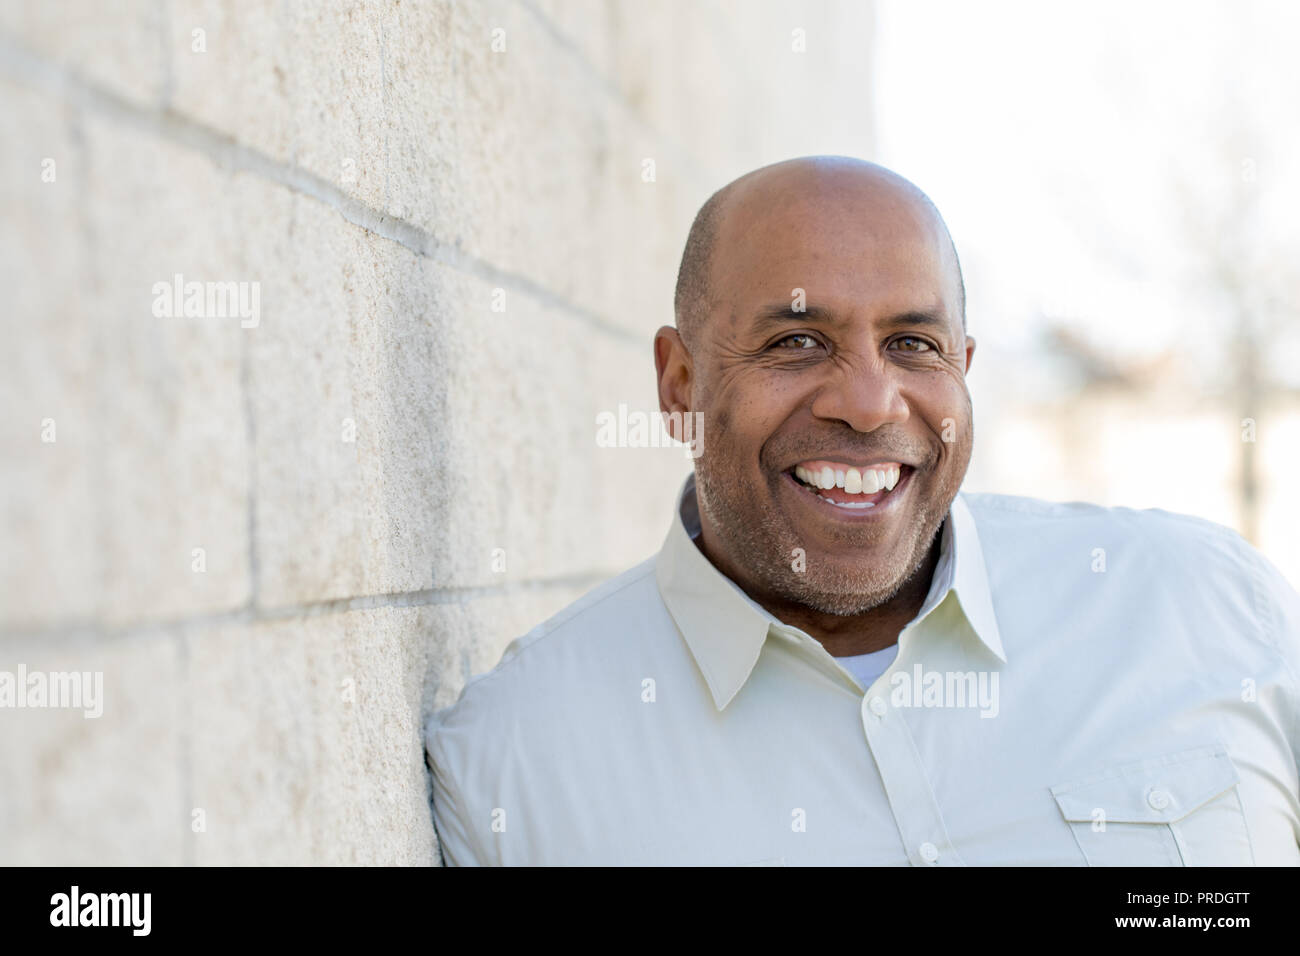 African American man smiling. Banque D'Images